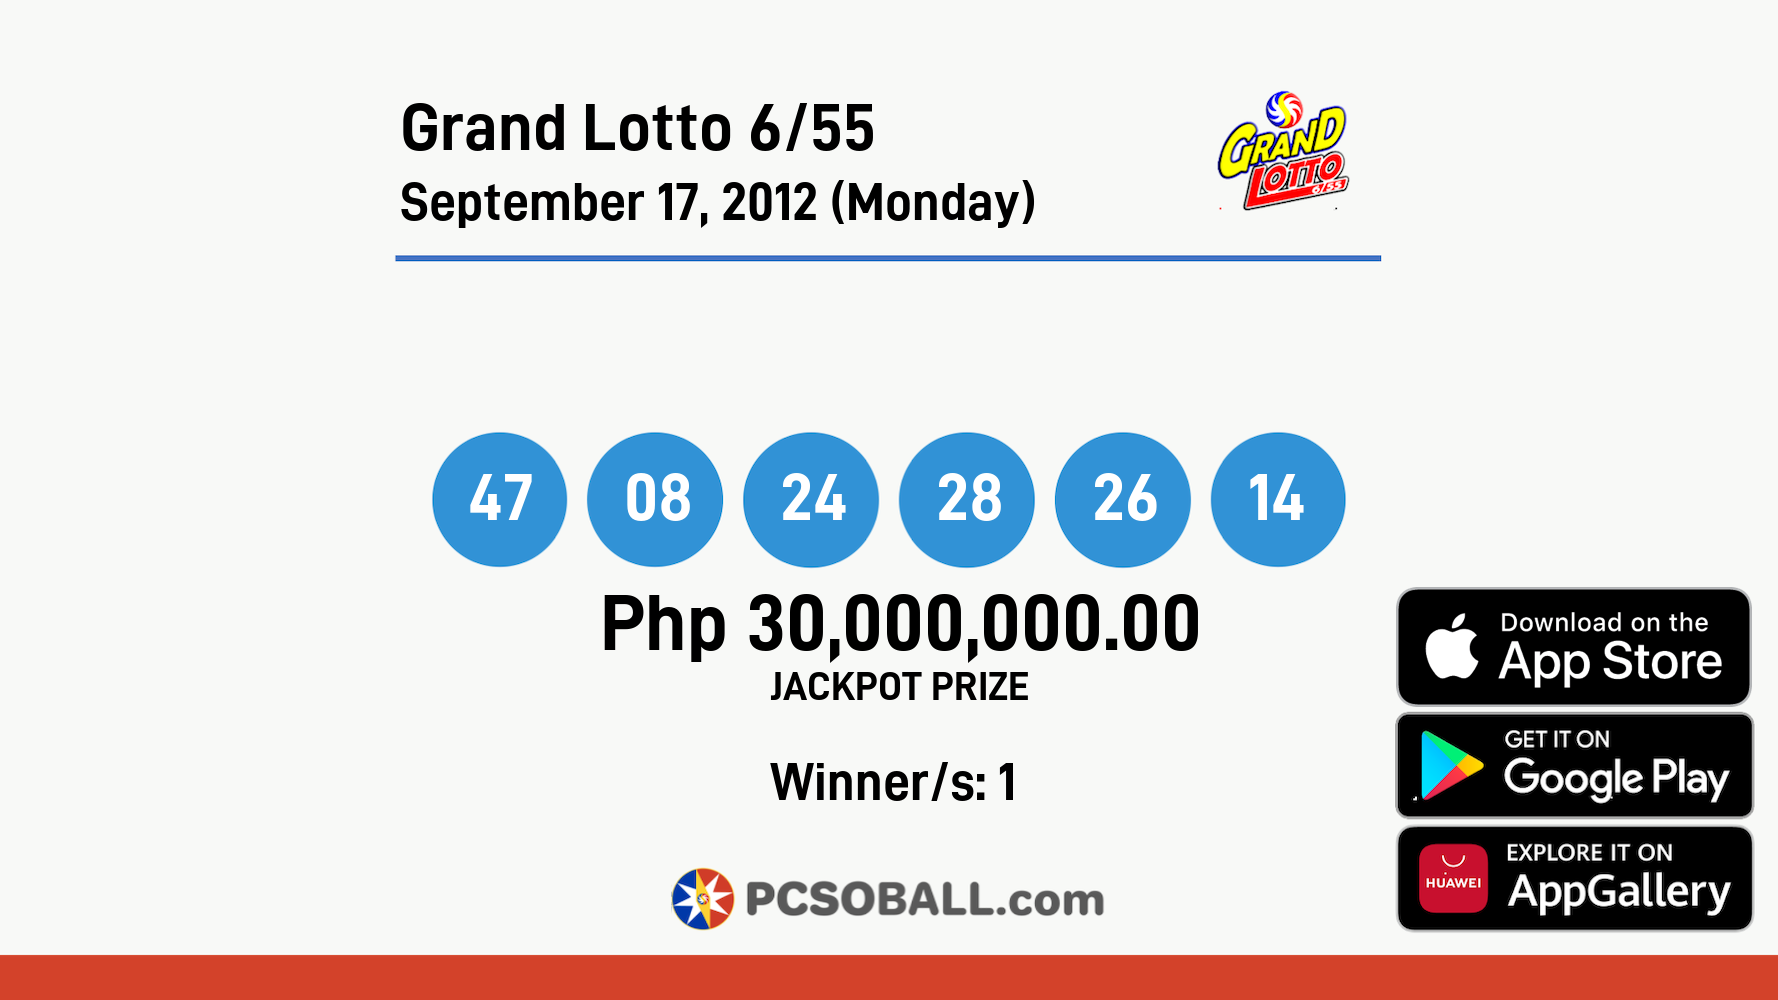 Grand Lotto 6/55 September 17, 2012 (Monday) Result